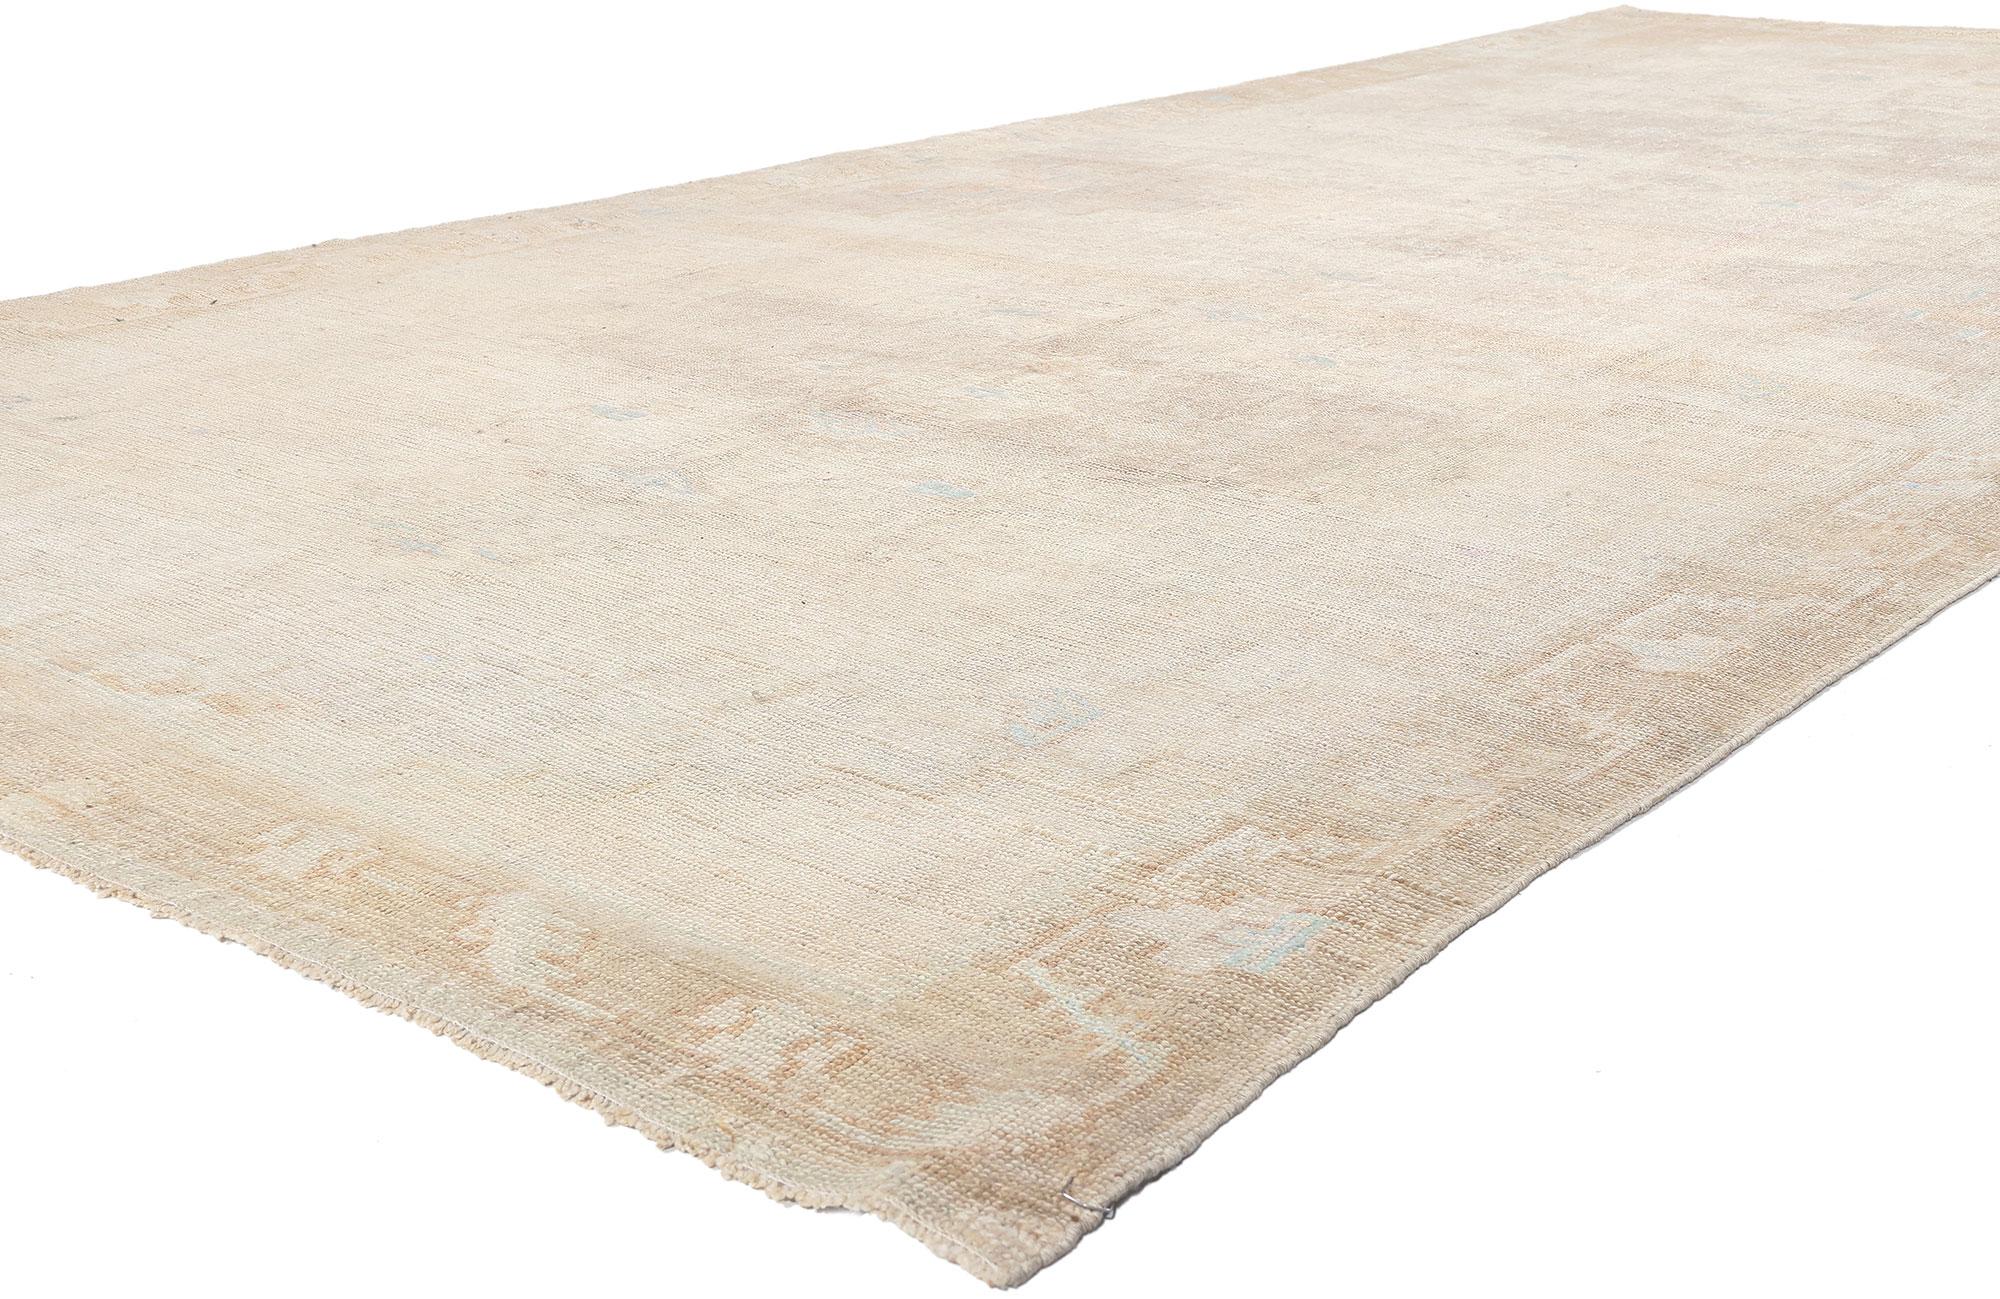 53712 Vintage Turkish Oushak Rug, 06'06 x 15'03. 
Reflecting elements of Shibui with incredible detail and texture, this hand knotted wool vintage Turkish Oushak rug is simple and subtle. The faded geometric silhouette and neutral colors woven into